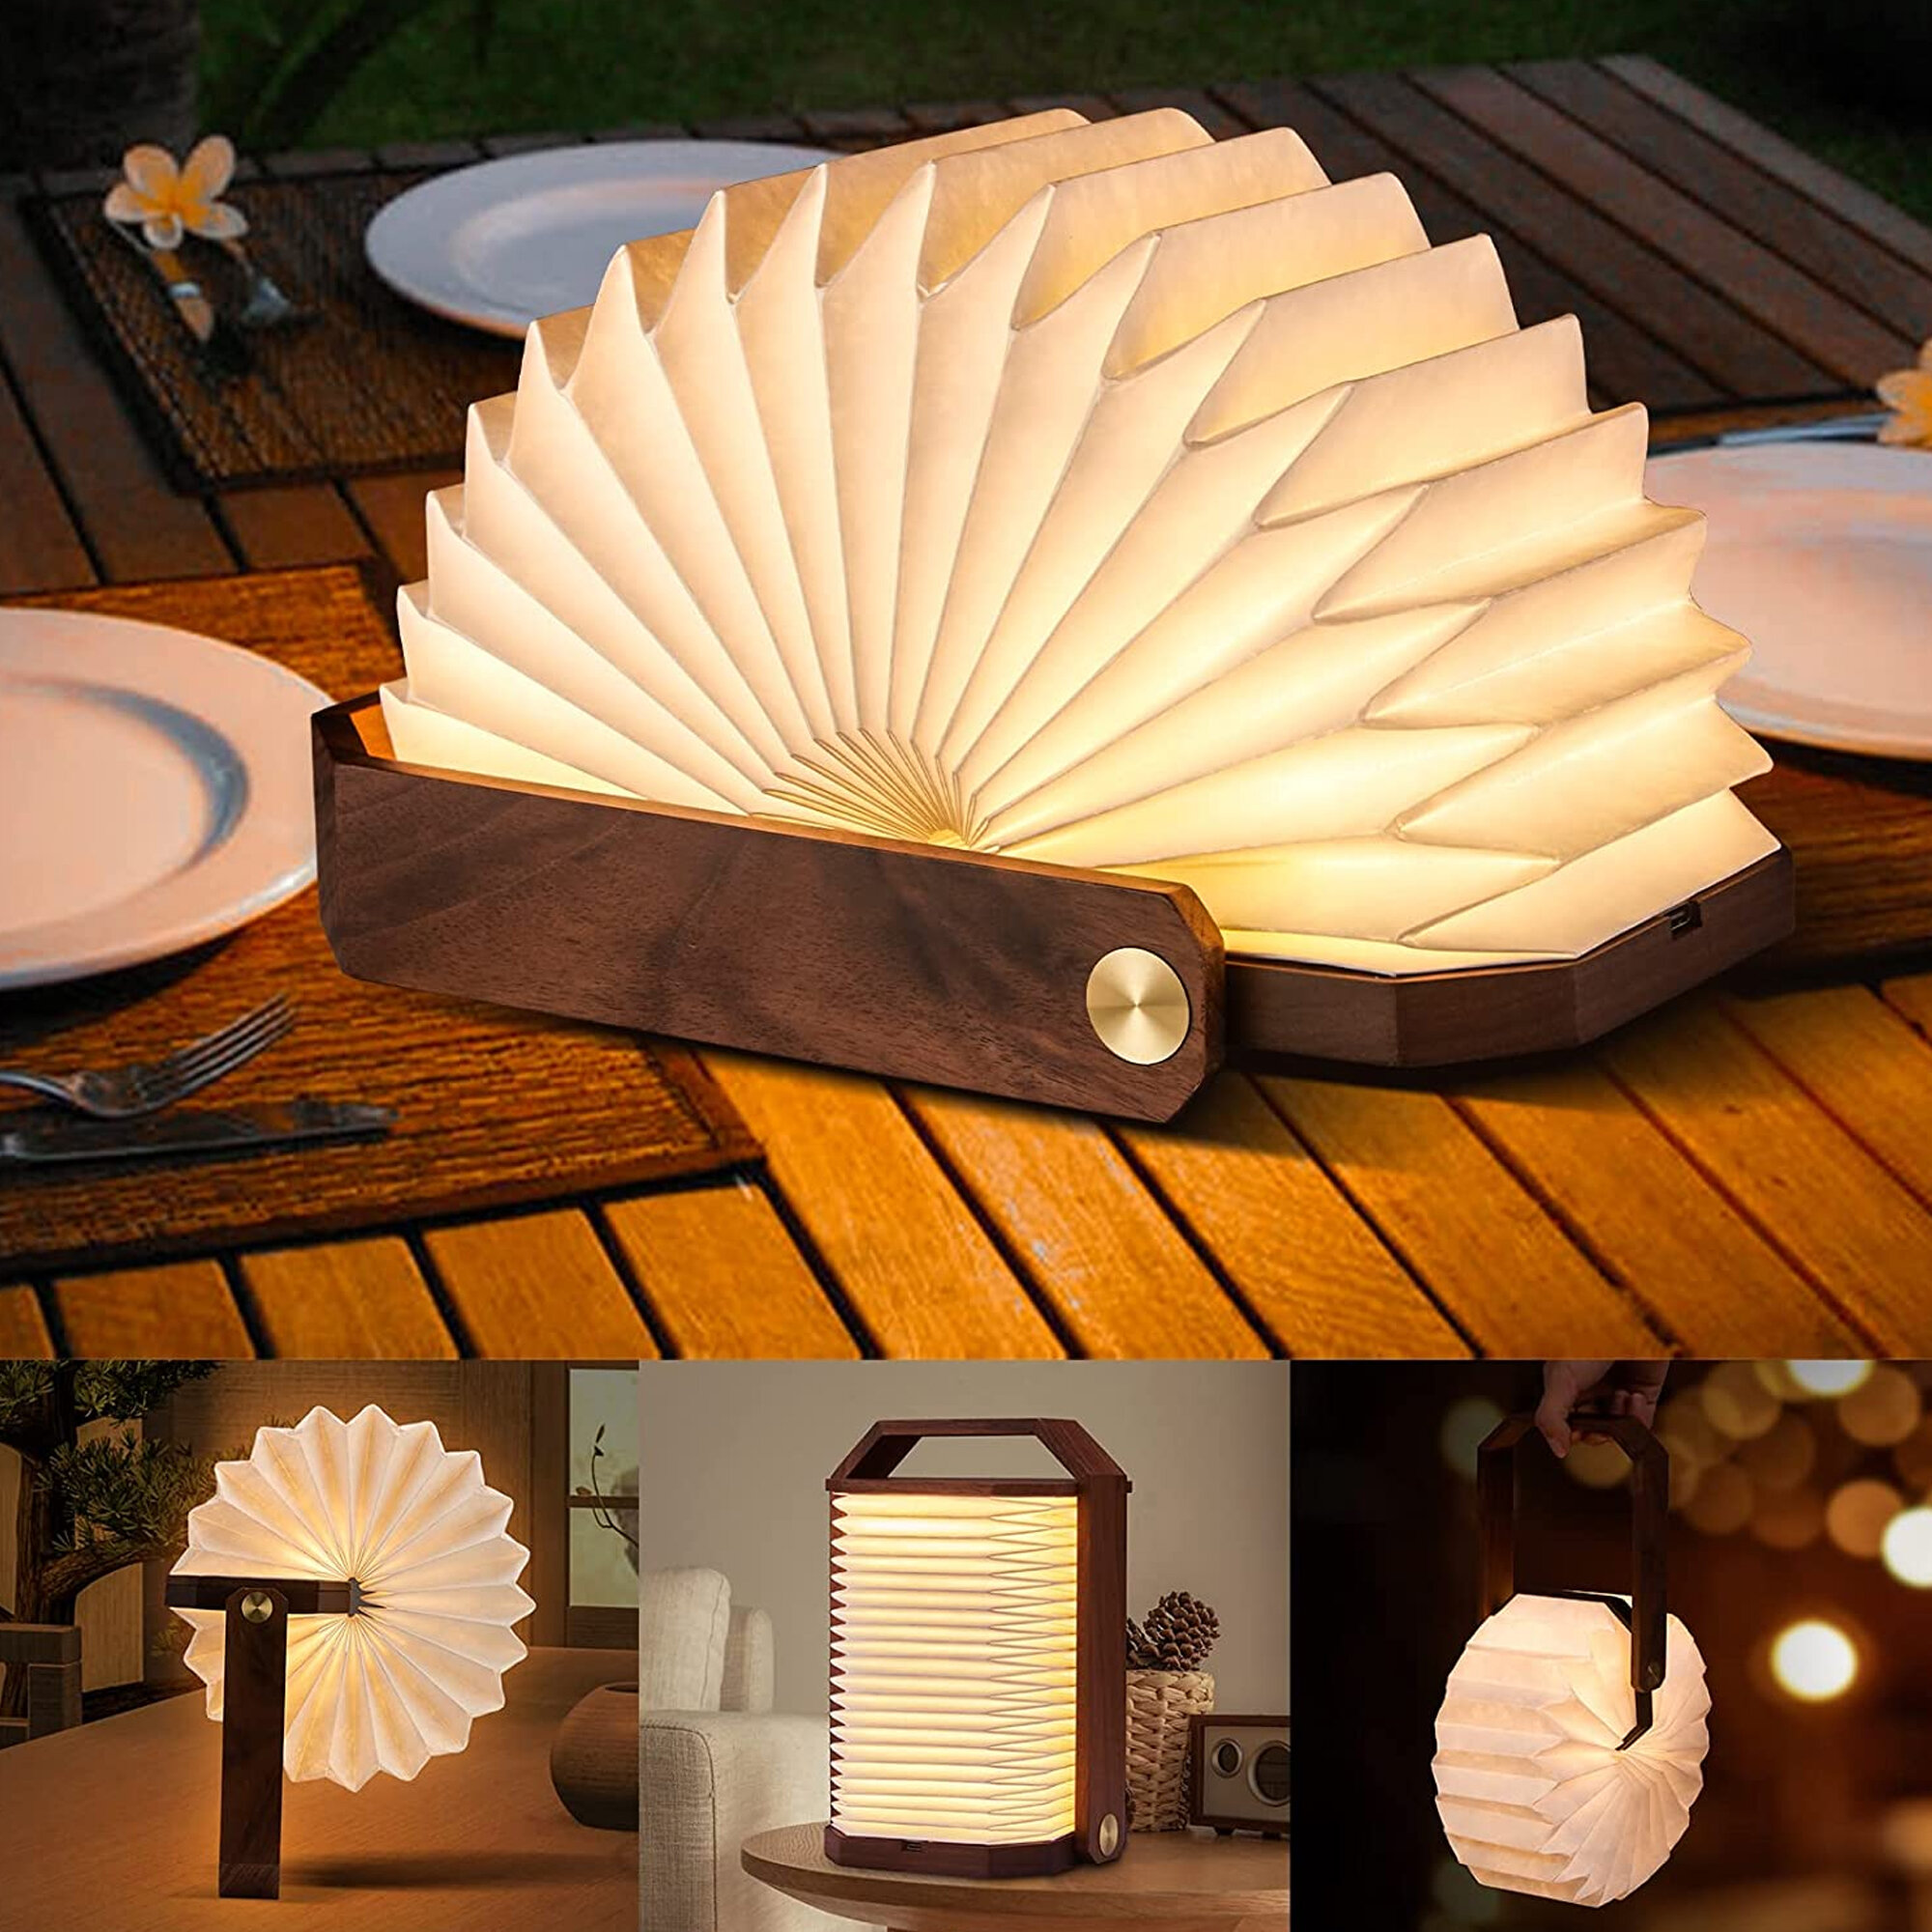 Led Book Lamp, Wooden Book Lamp, Usb Rechargeable Book Lamp, Aurora Lamp  Book, 360 Foldable, Decorative (warm White Light)